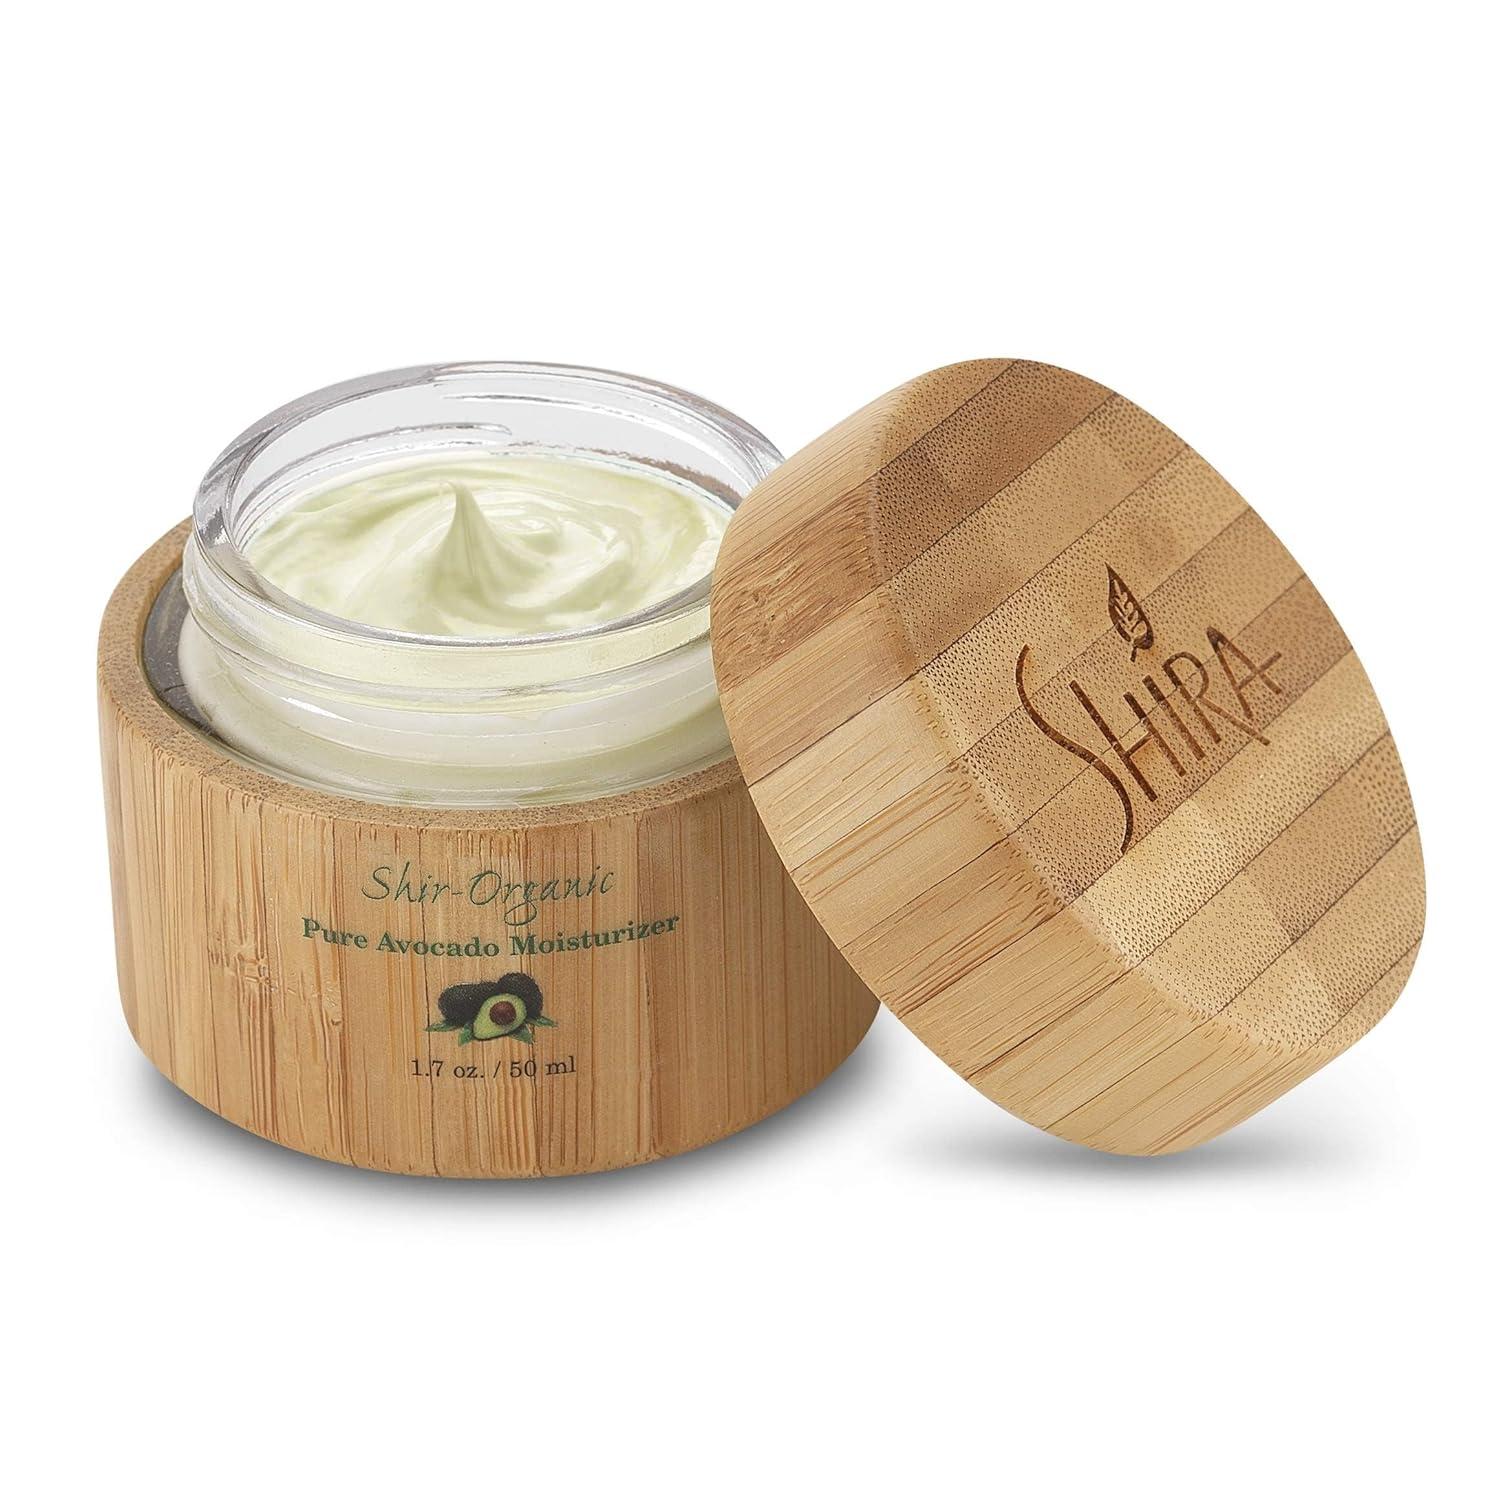 Shira Shir-Organic Avocado Moisturizer With Combination of Vitamins A B D and E For 24 hrs Hydrating And Nourished Skin 50